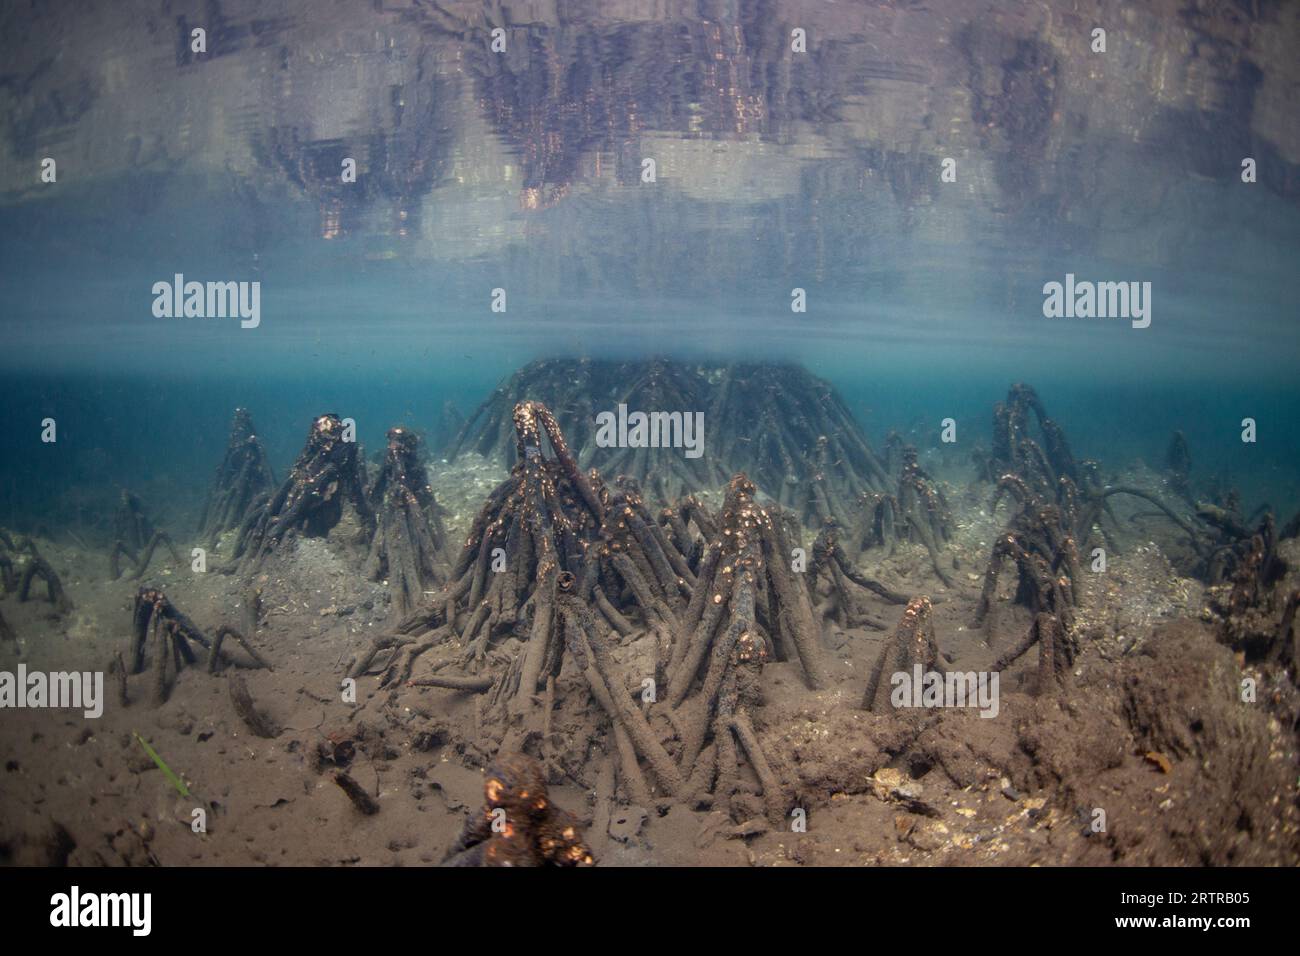 Mangrove roots rise from the mud of a marine lake in Raja Ampat, Indonesia. Mangroves play important ecological roles in tropical environments. Stock Photo